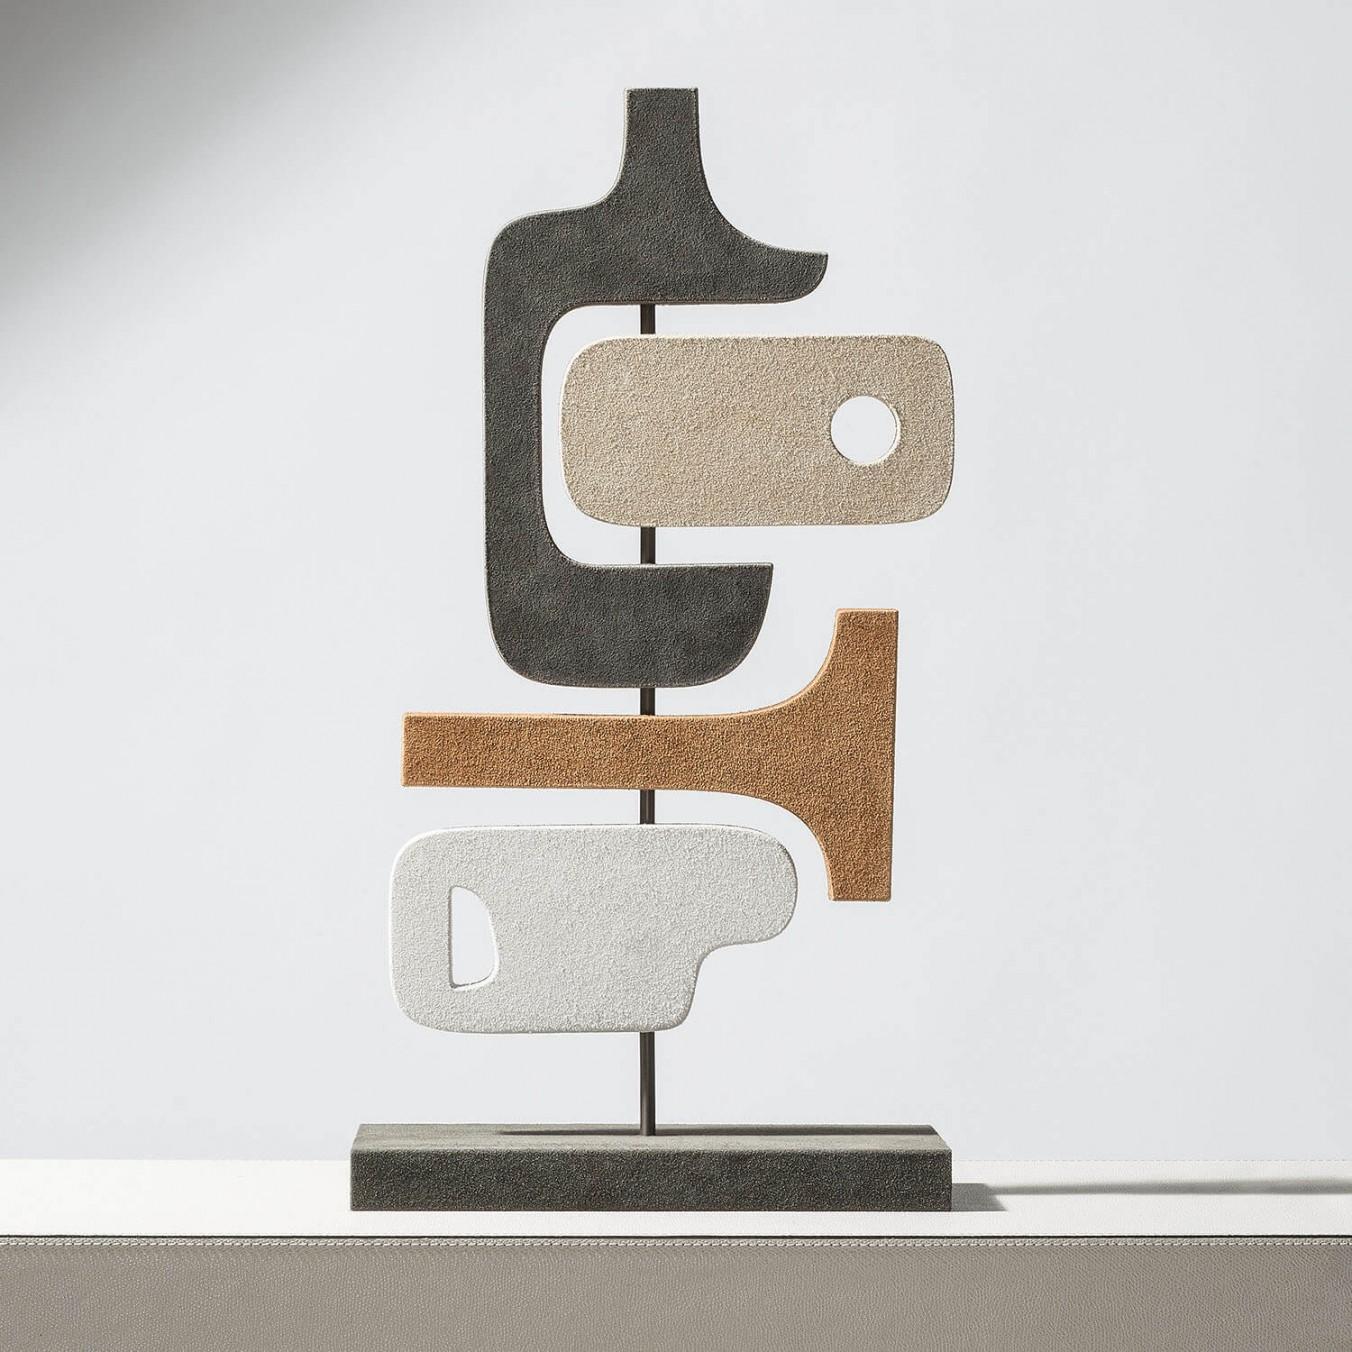 Contemporary Suede leather sculpture - Tabou 4 by Stephane Parmentier for Giobagnara.

A mix of space-age design and tribal art, these contemporary totems are great decorative pieces able to create a connection between abstraction and